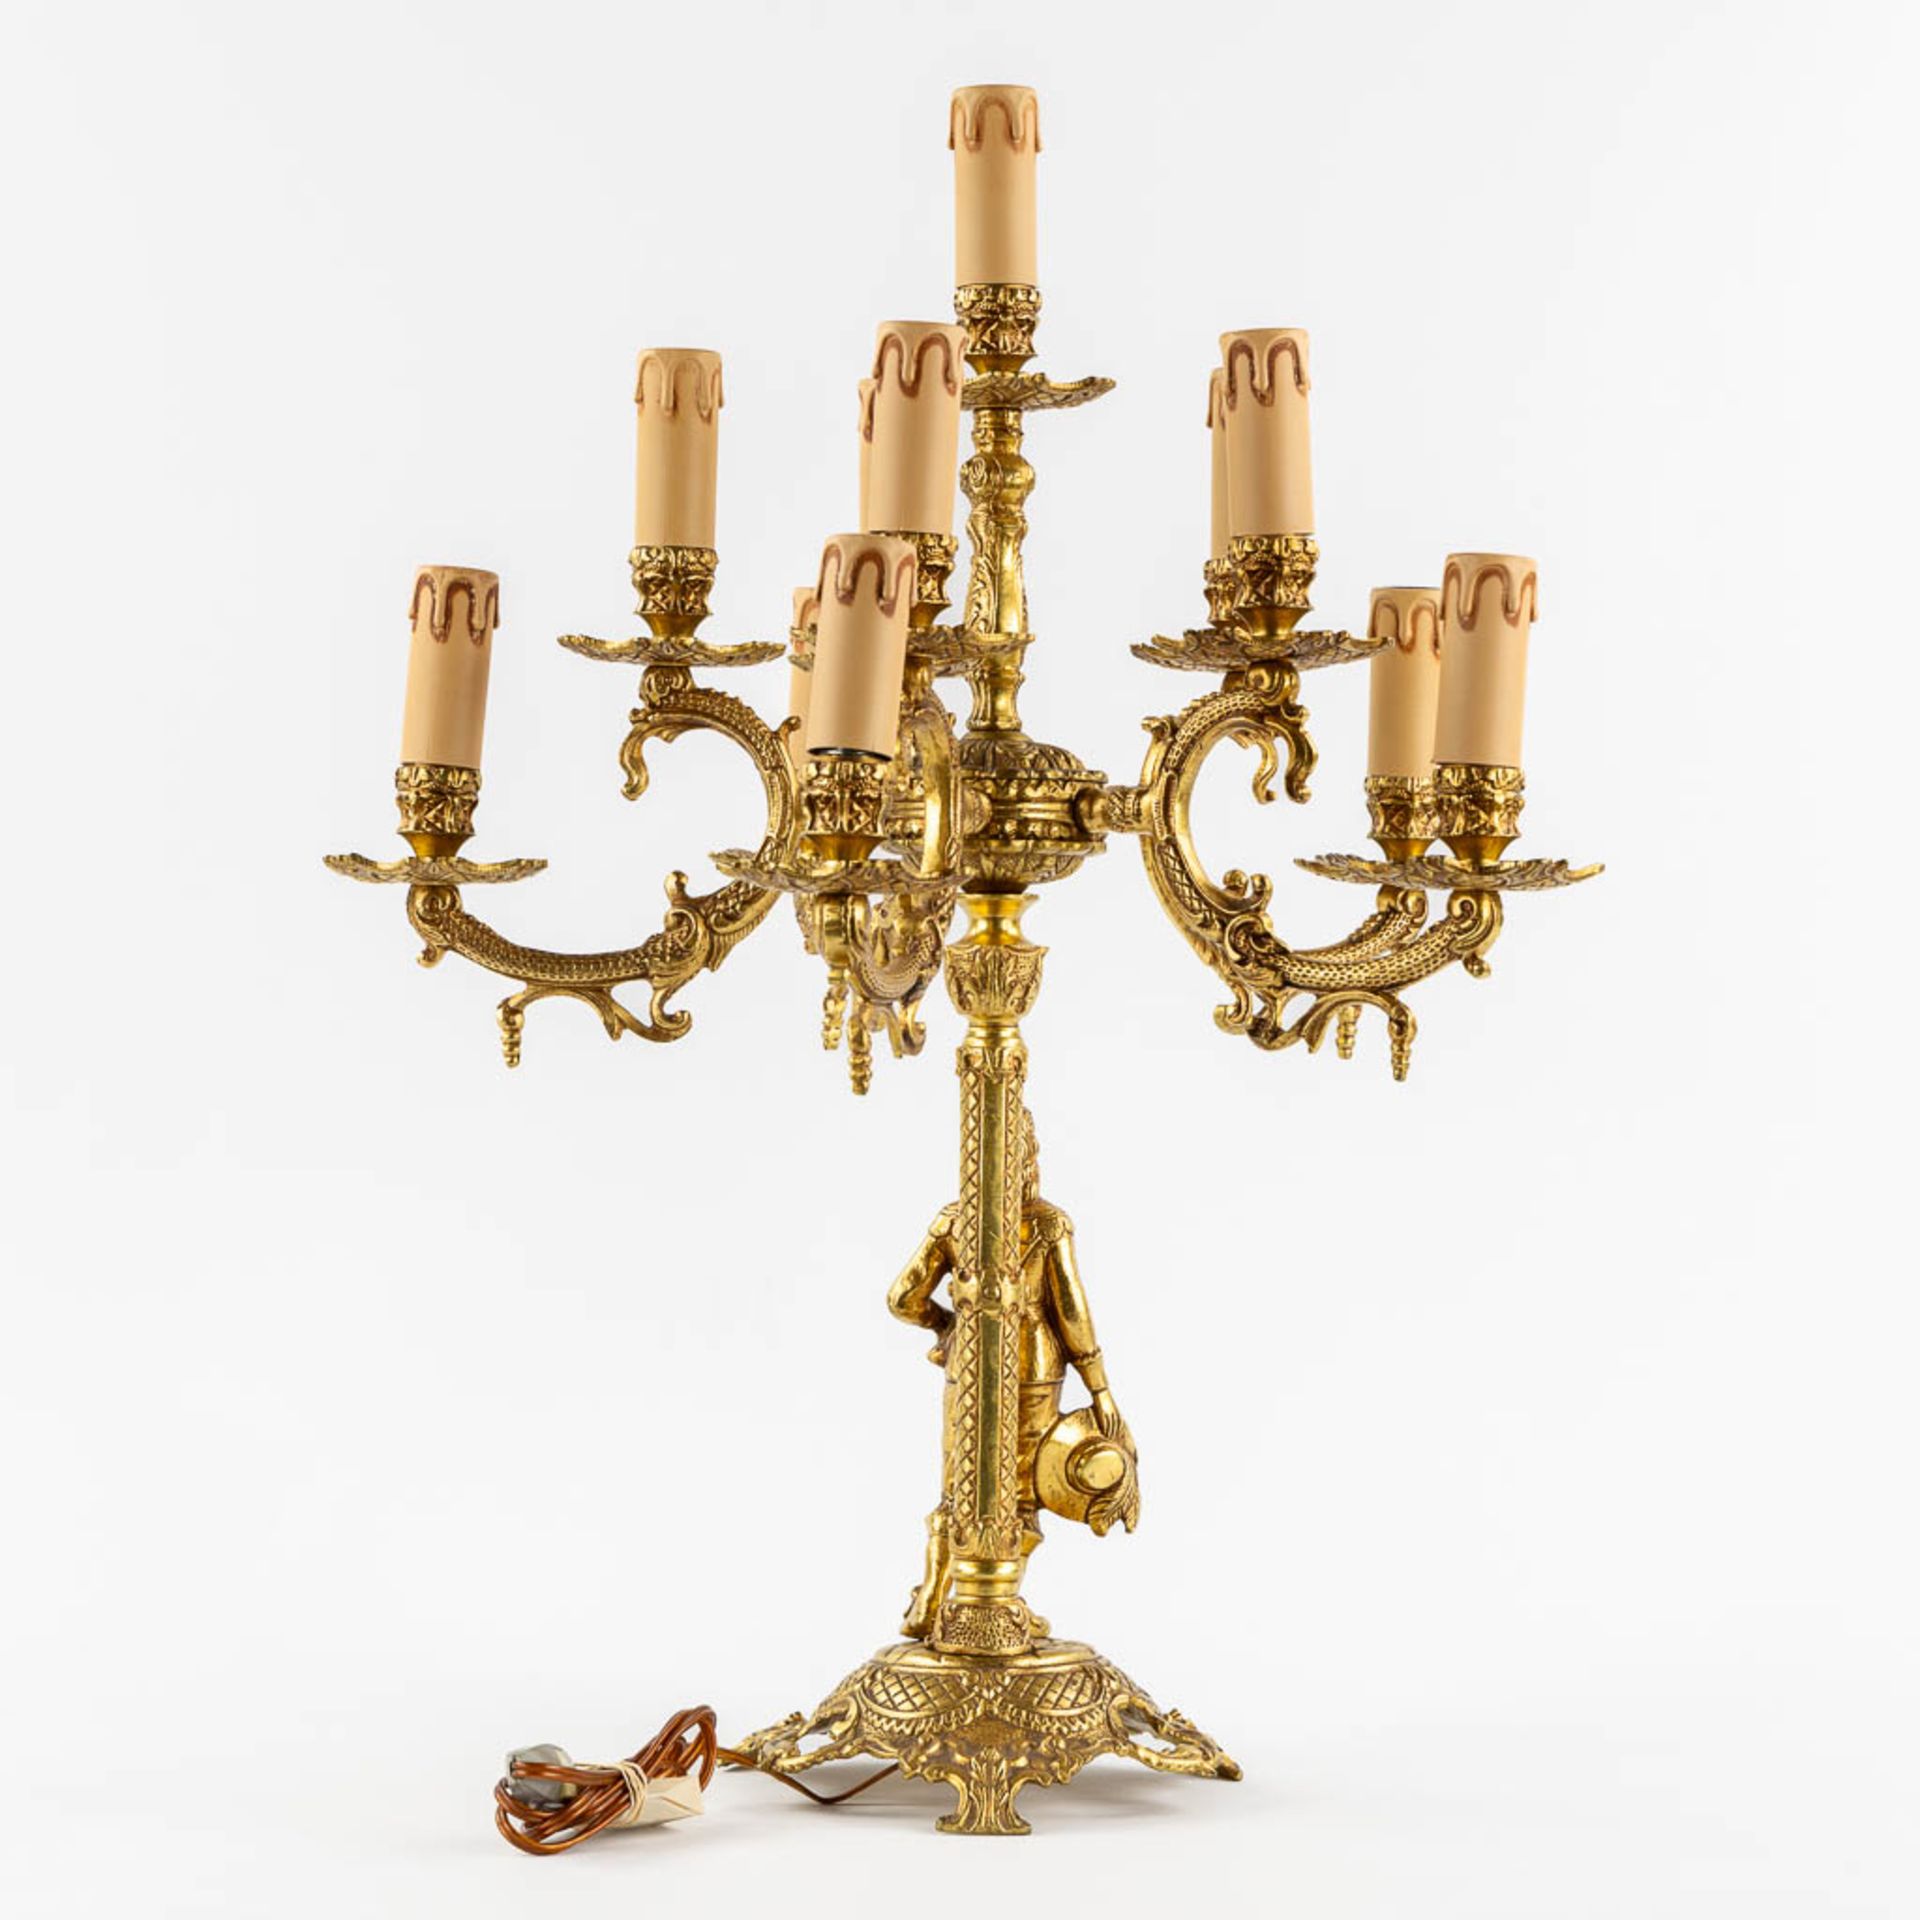 A large and decorative table lamp with a musketeer figurine, gilt bronze. 20th C. (H:61 x D:46 cm) - Image 4 of 11